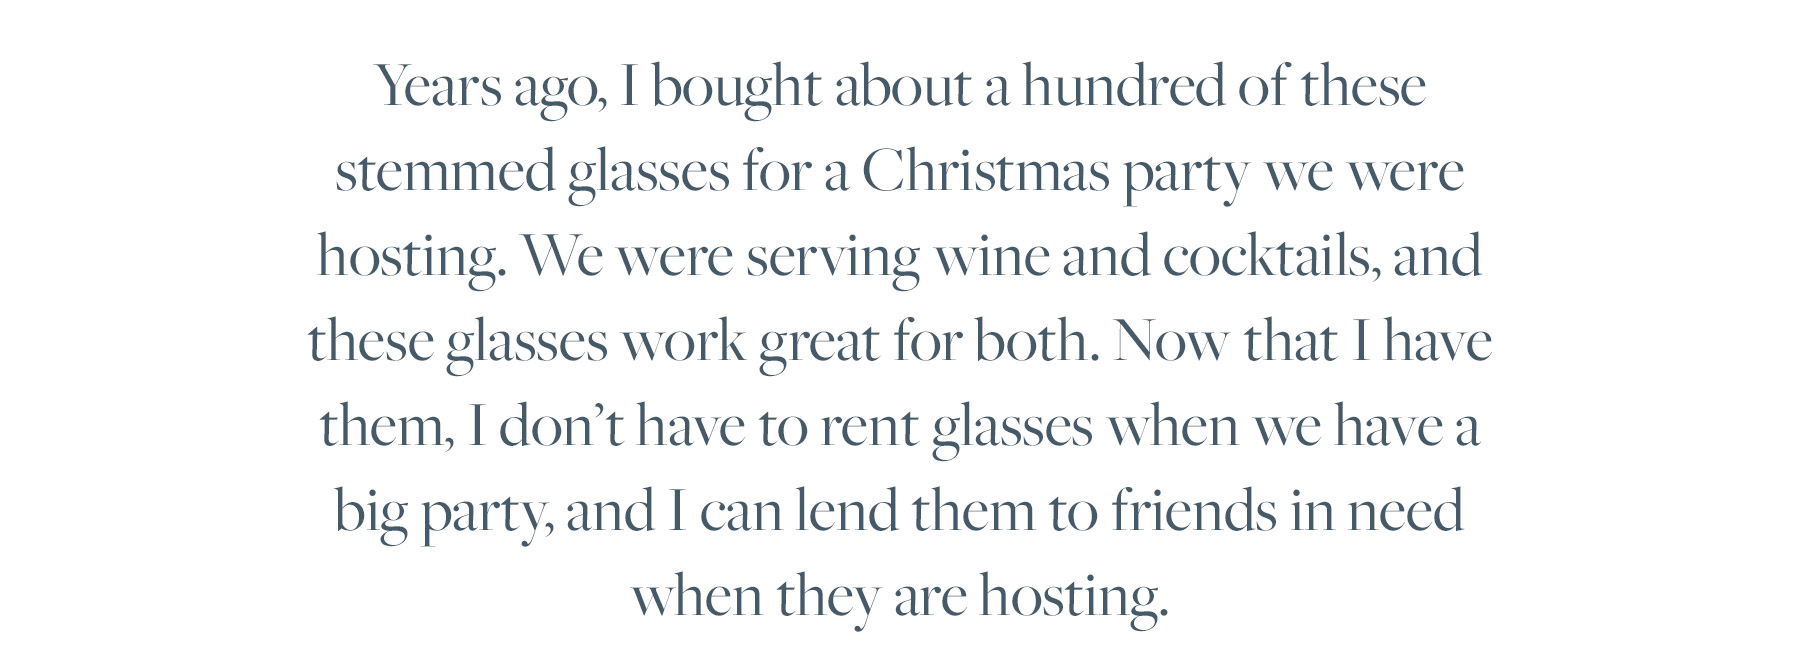 Years ago, I bought about a hundred of these stemmed glasses for a Christmas party we were hosting. We were serving wine and cocktails, and these glasses work great for both. Now that I have them, I don't have to rent glasses when we have a big party, and I can lend them to friends in need when they are hosting.